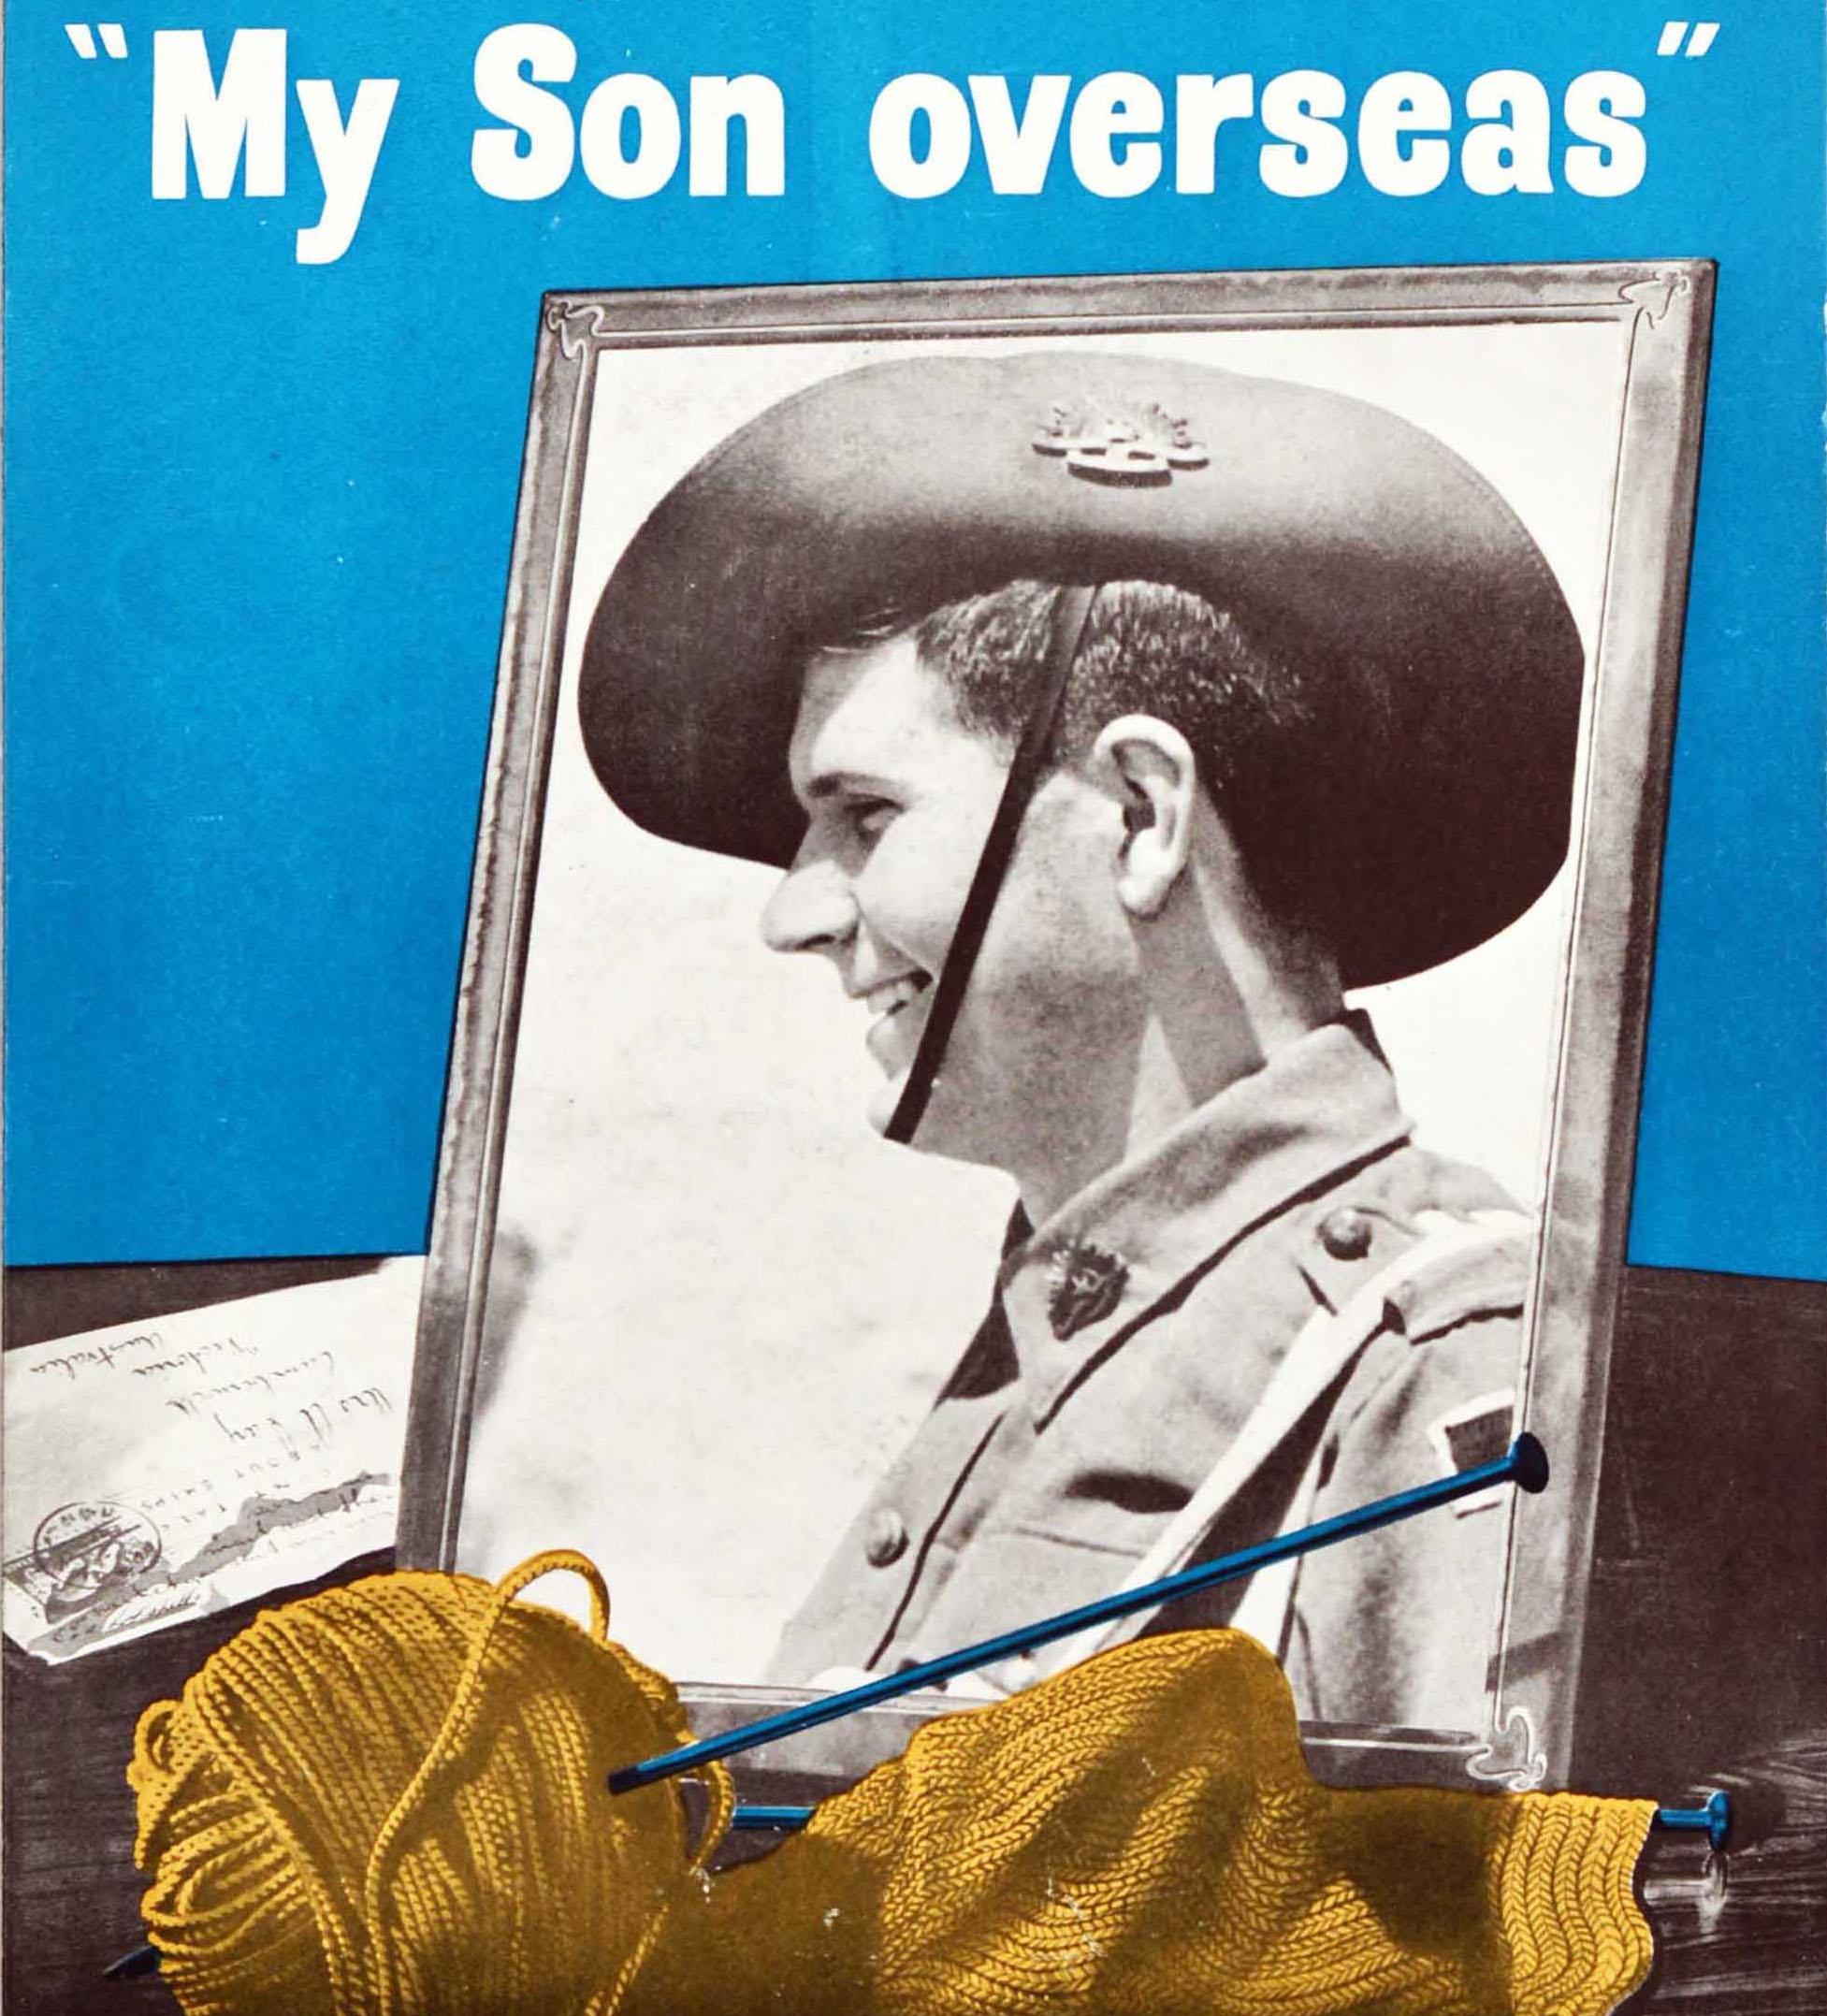 Original vintage World War Two recruitment propaganda poster for the Second Australian Imperial Force (2nd AIF; 1939-1947) voluntary military forces - Make her proud to say 'My Son overseas' Join the AIF - featuring a photograph of a smiling soldier